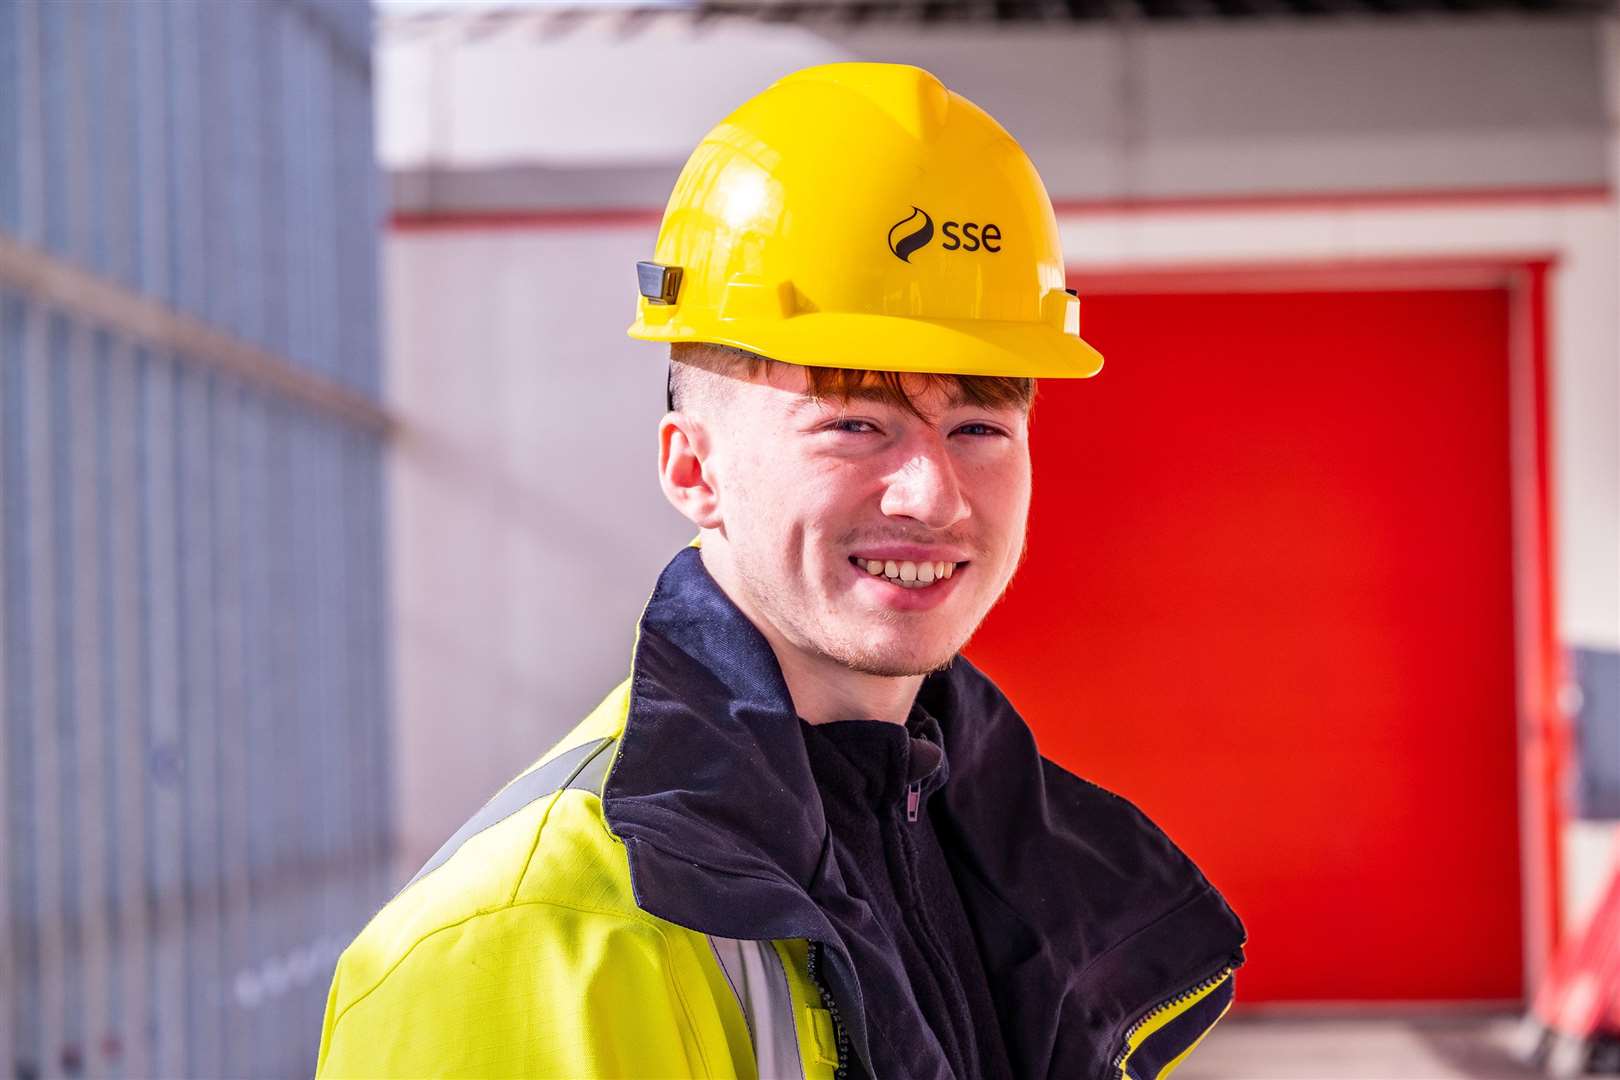 William Wright (18) joined SSE Renewables at a recent induction event.